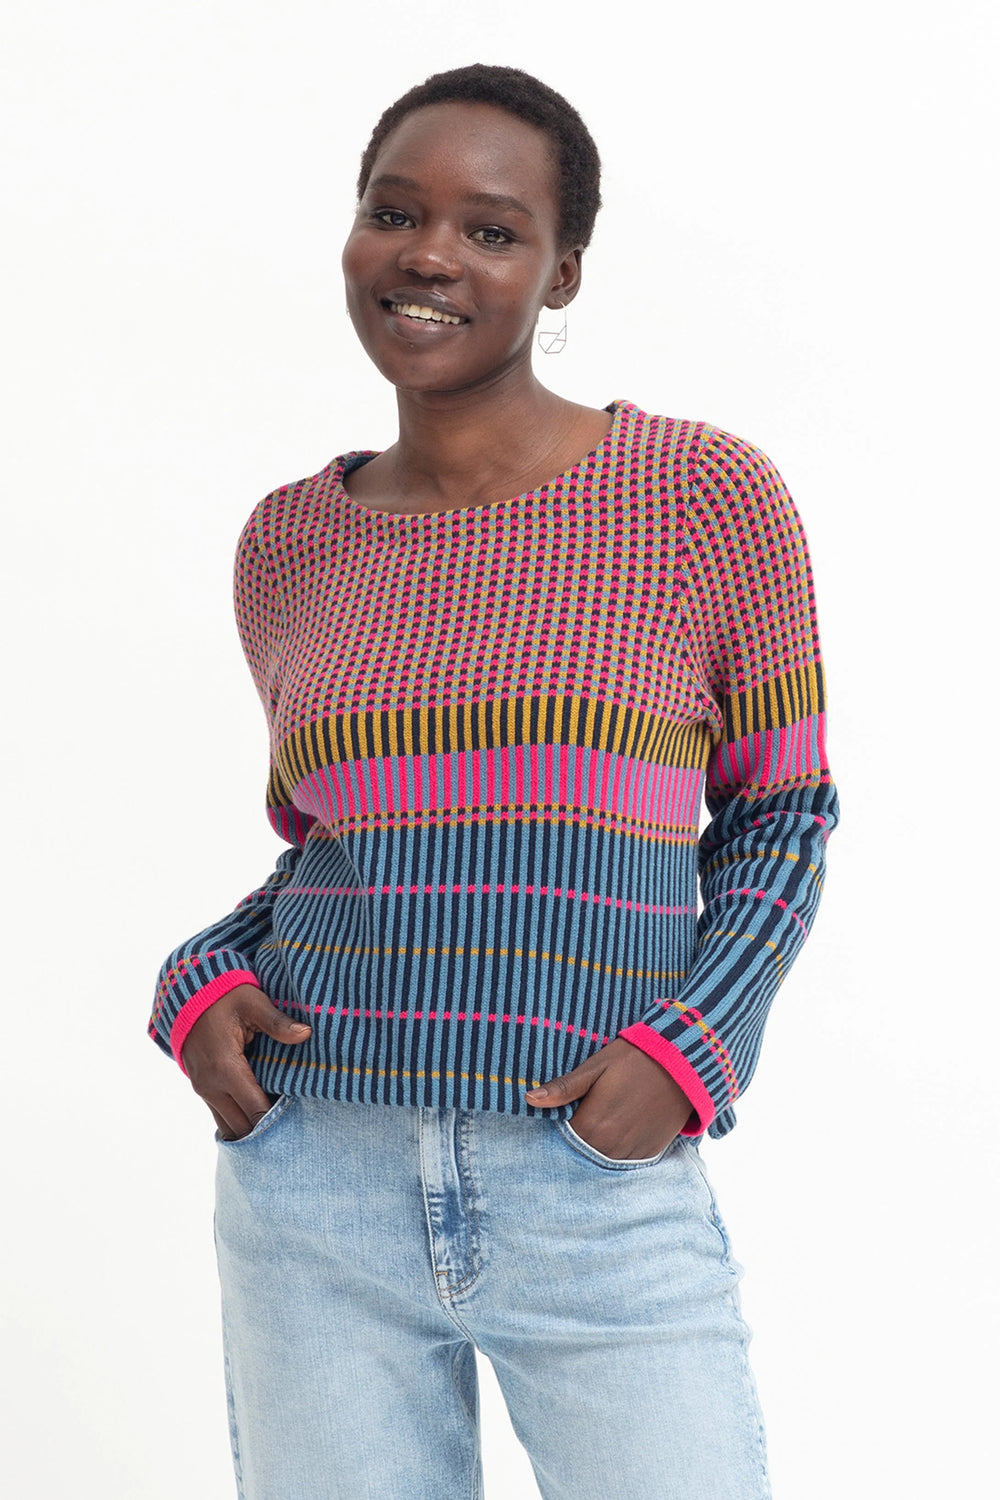 Cila Jumper | Pink Modern shape, multi-coloured.  In a multi-coloured check knit design, the Cila Knit Jumper is a boat neck boxy-cut jumper with set-in sleeves. It has a cropped body length, with small side splits at the hem for added comfort.